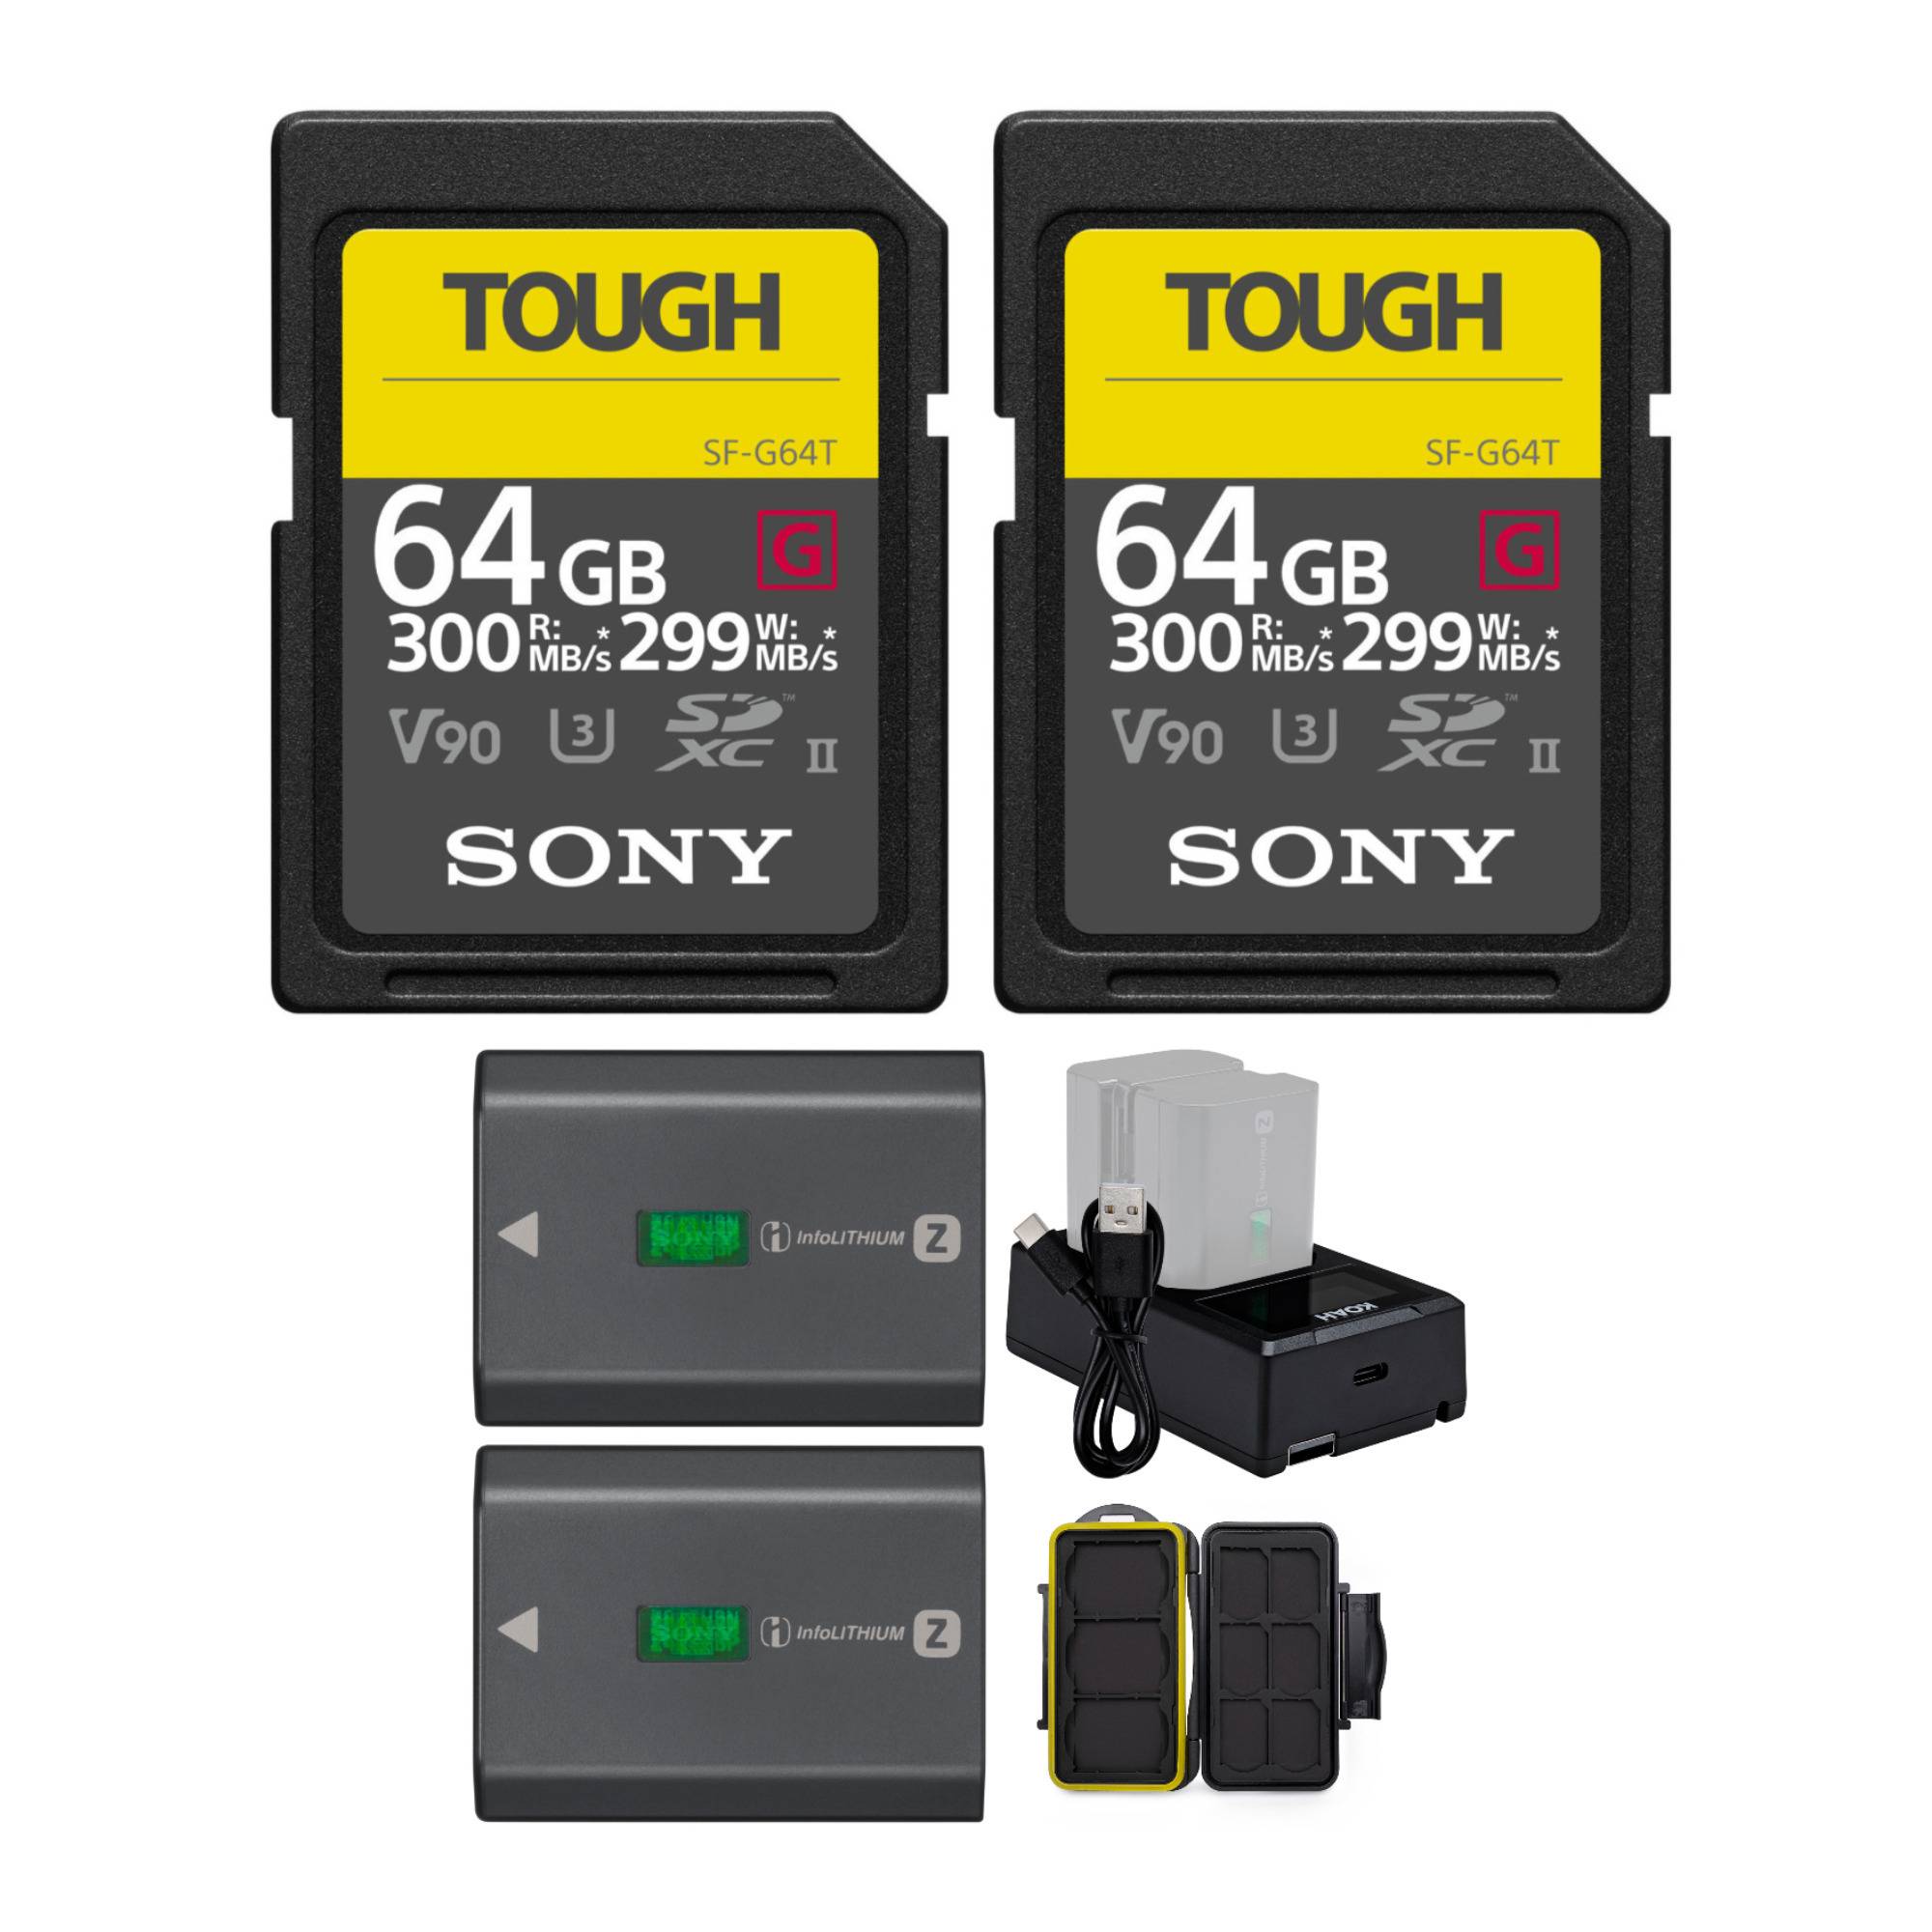 Sony 64GB UHS-II Tough G-Series SD Card (2-Pack) with Battery Pack and USB-C Charger Bundle